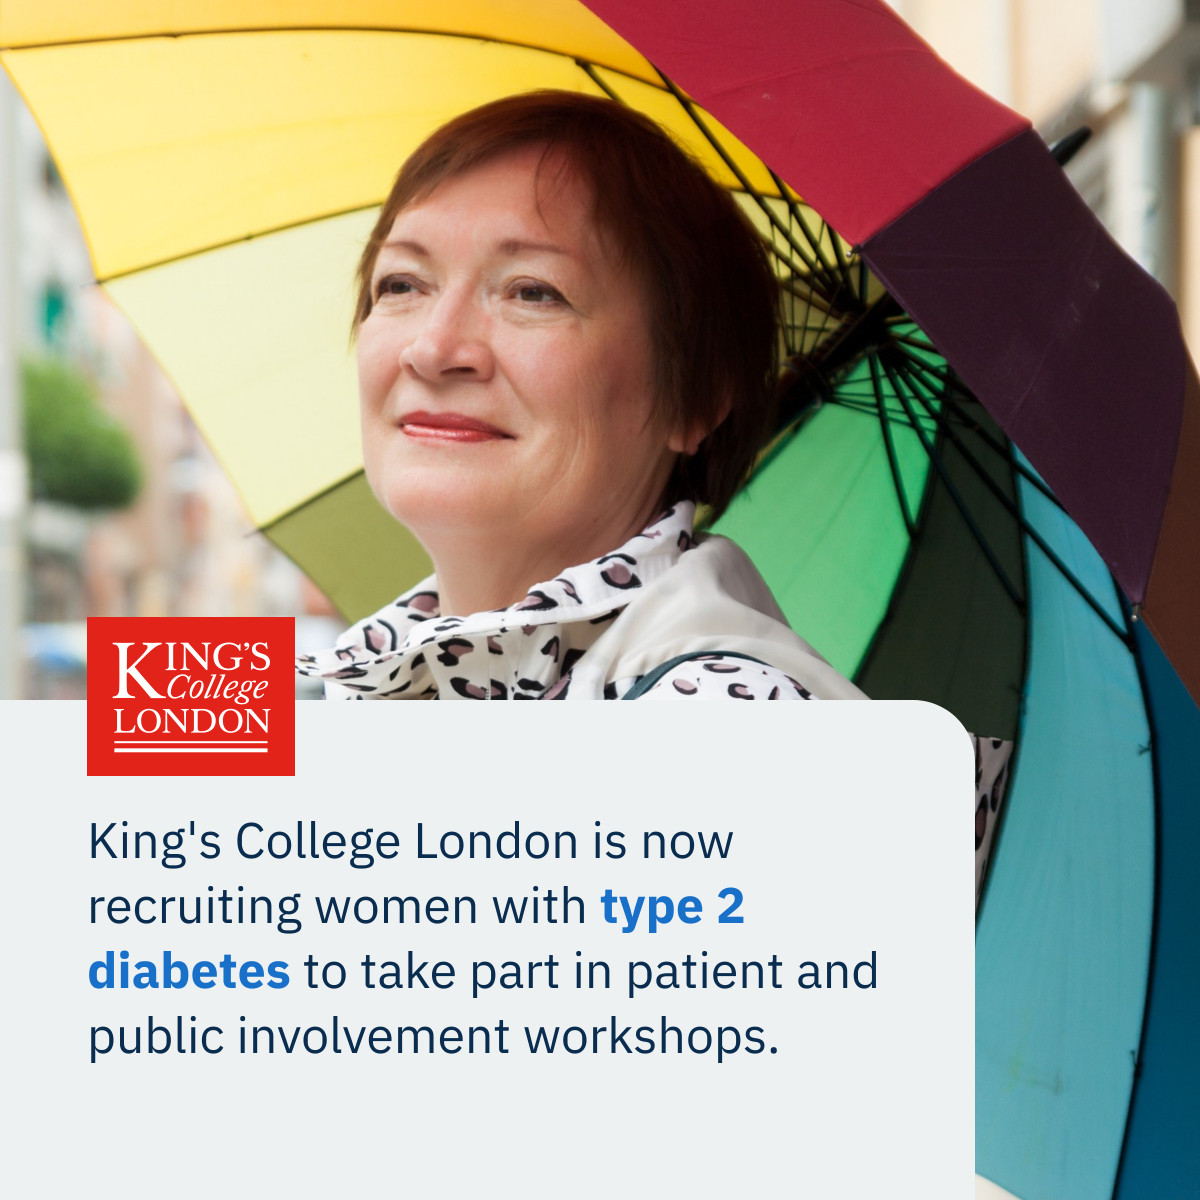 We’re looking for midlife women living with type 2 diabetes to volunteer for patient and public involvement workshops with Kings College London. Find out more: healthresearch.study/participate/wo…